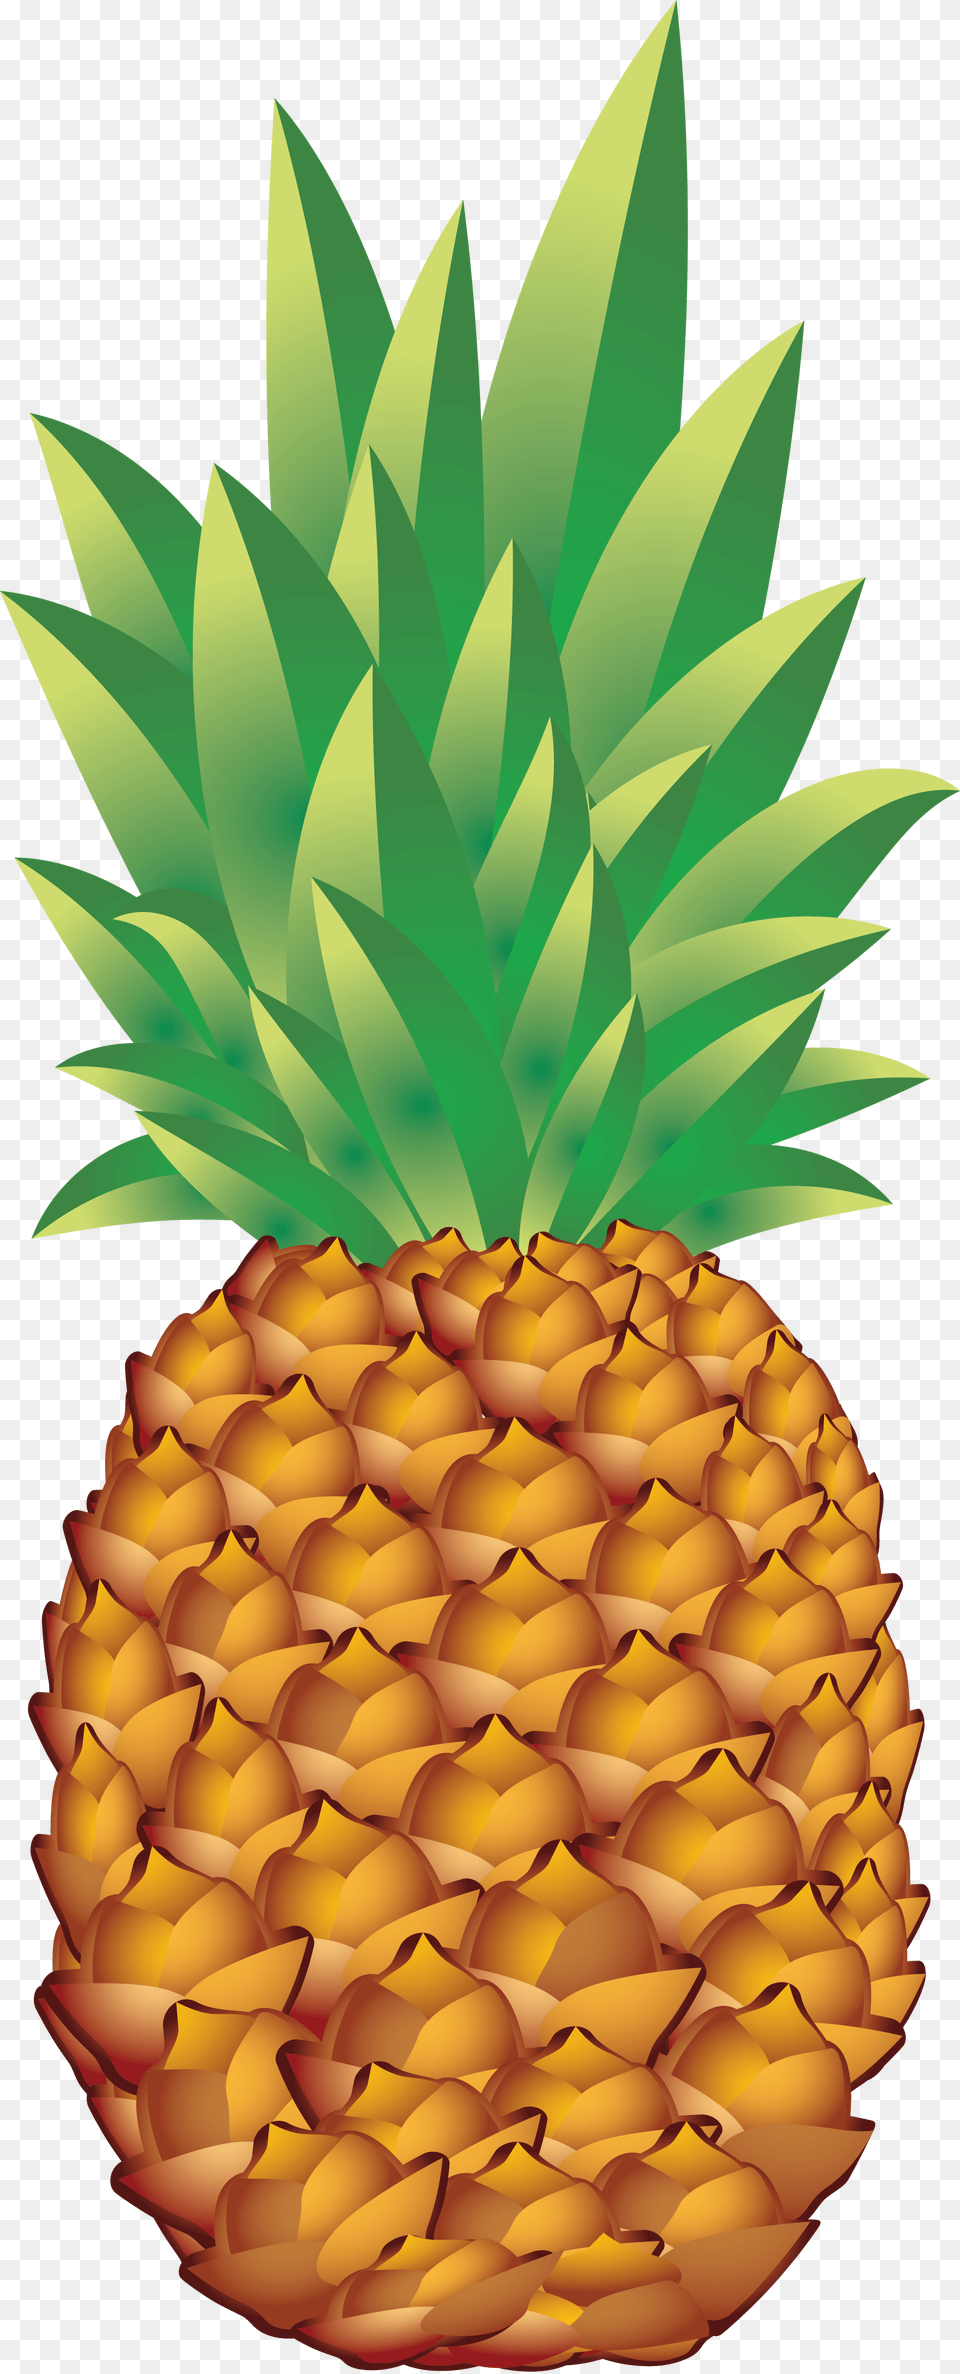 Pineapple Free Download Pineapple, Food, Fruit, Plant, Produce Png Image